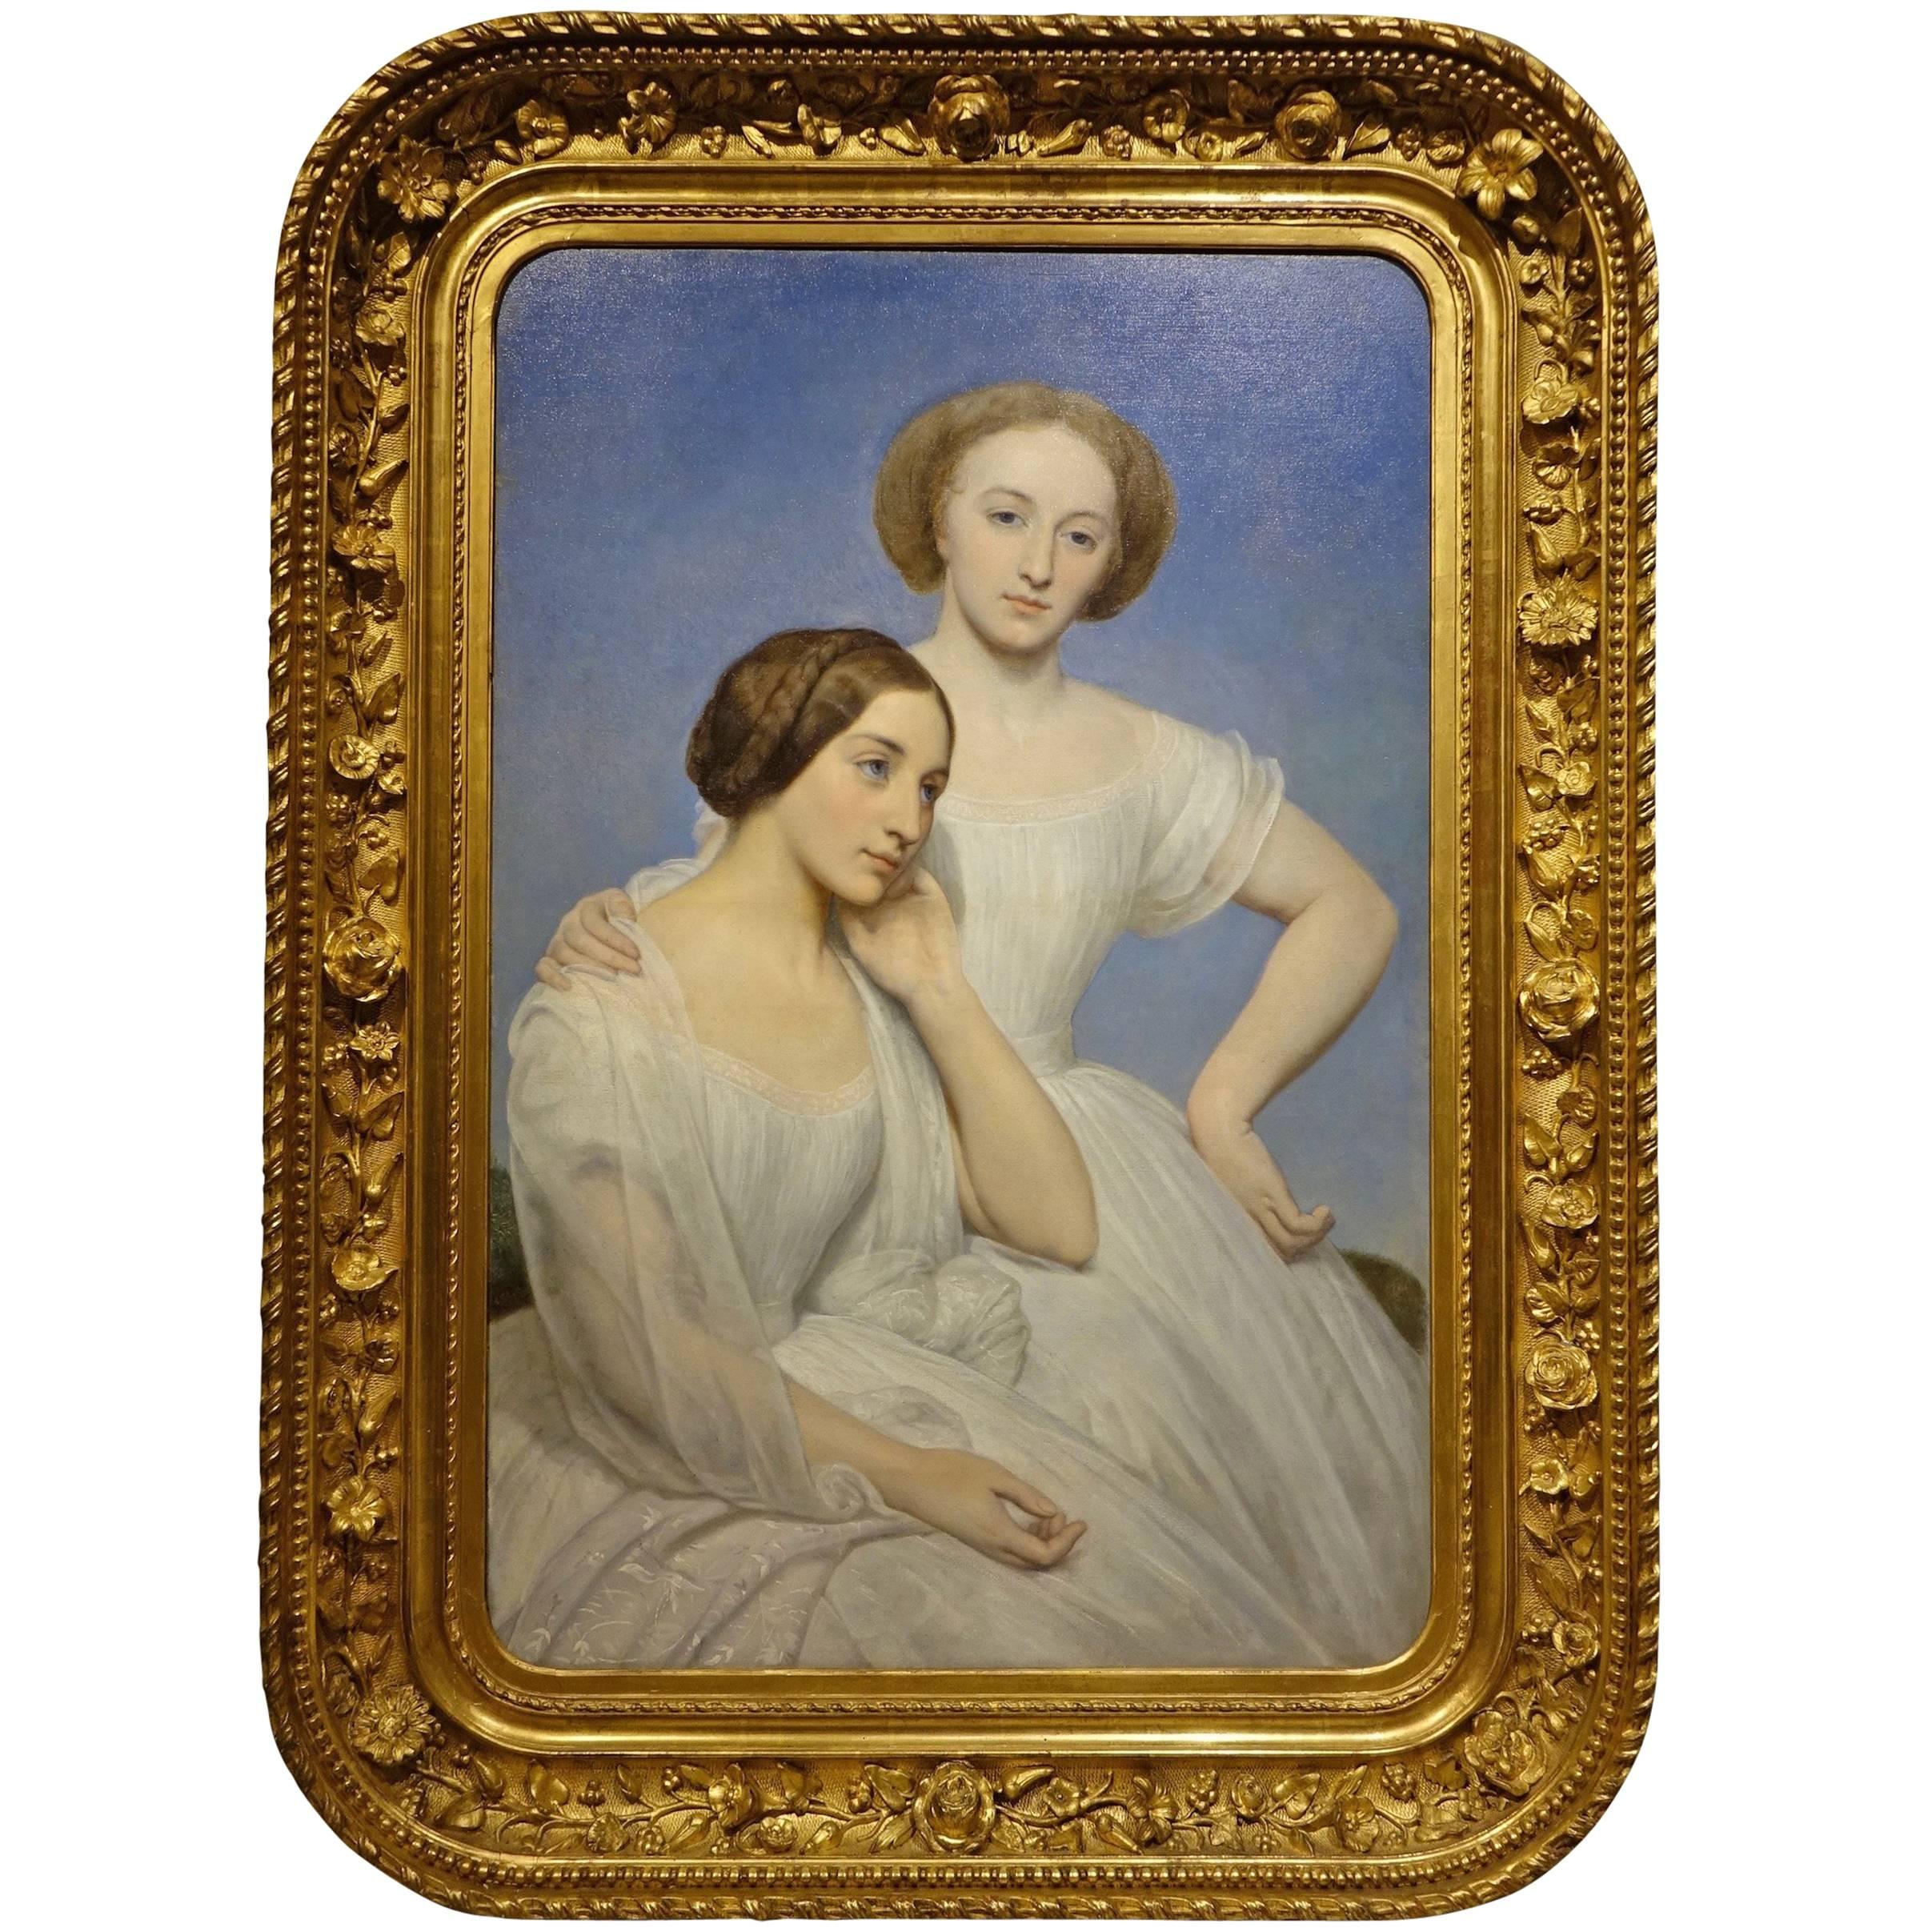  Double Portrait by Ary Scheffer (1795-1858  )Oil on Panel 